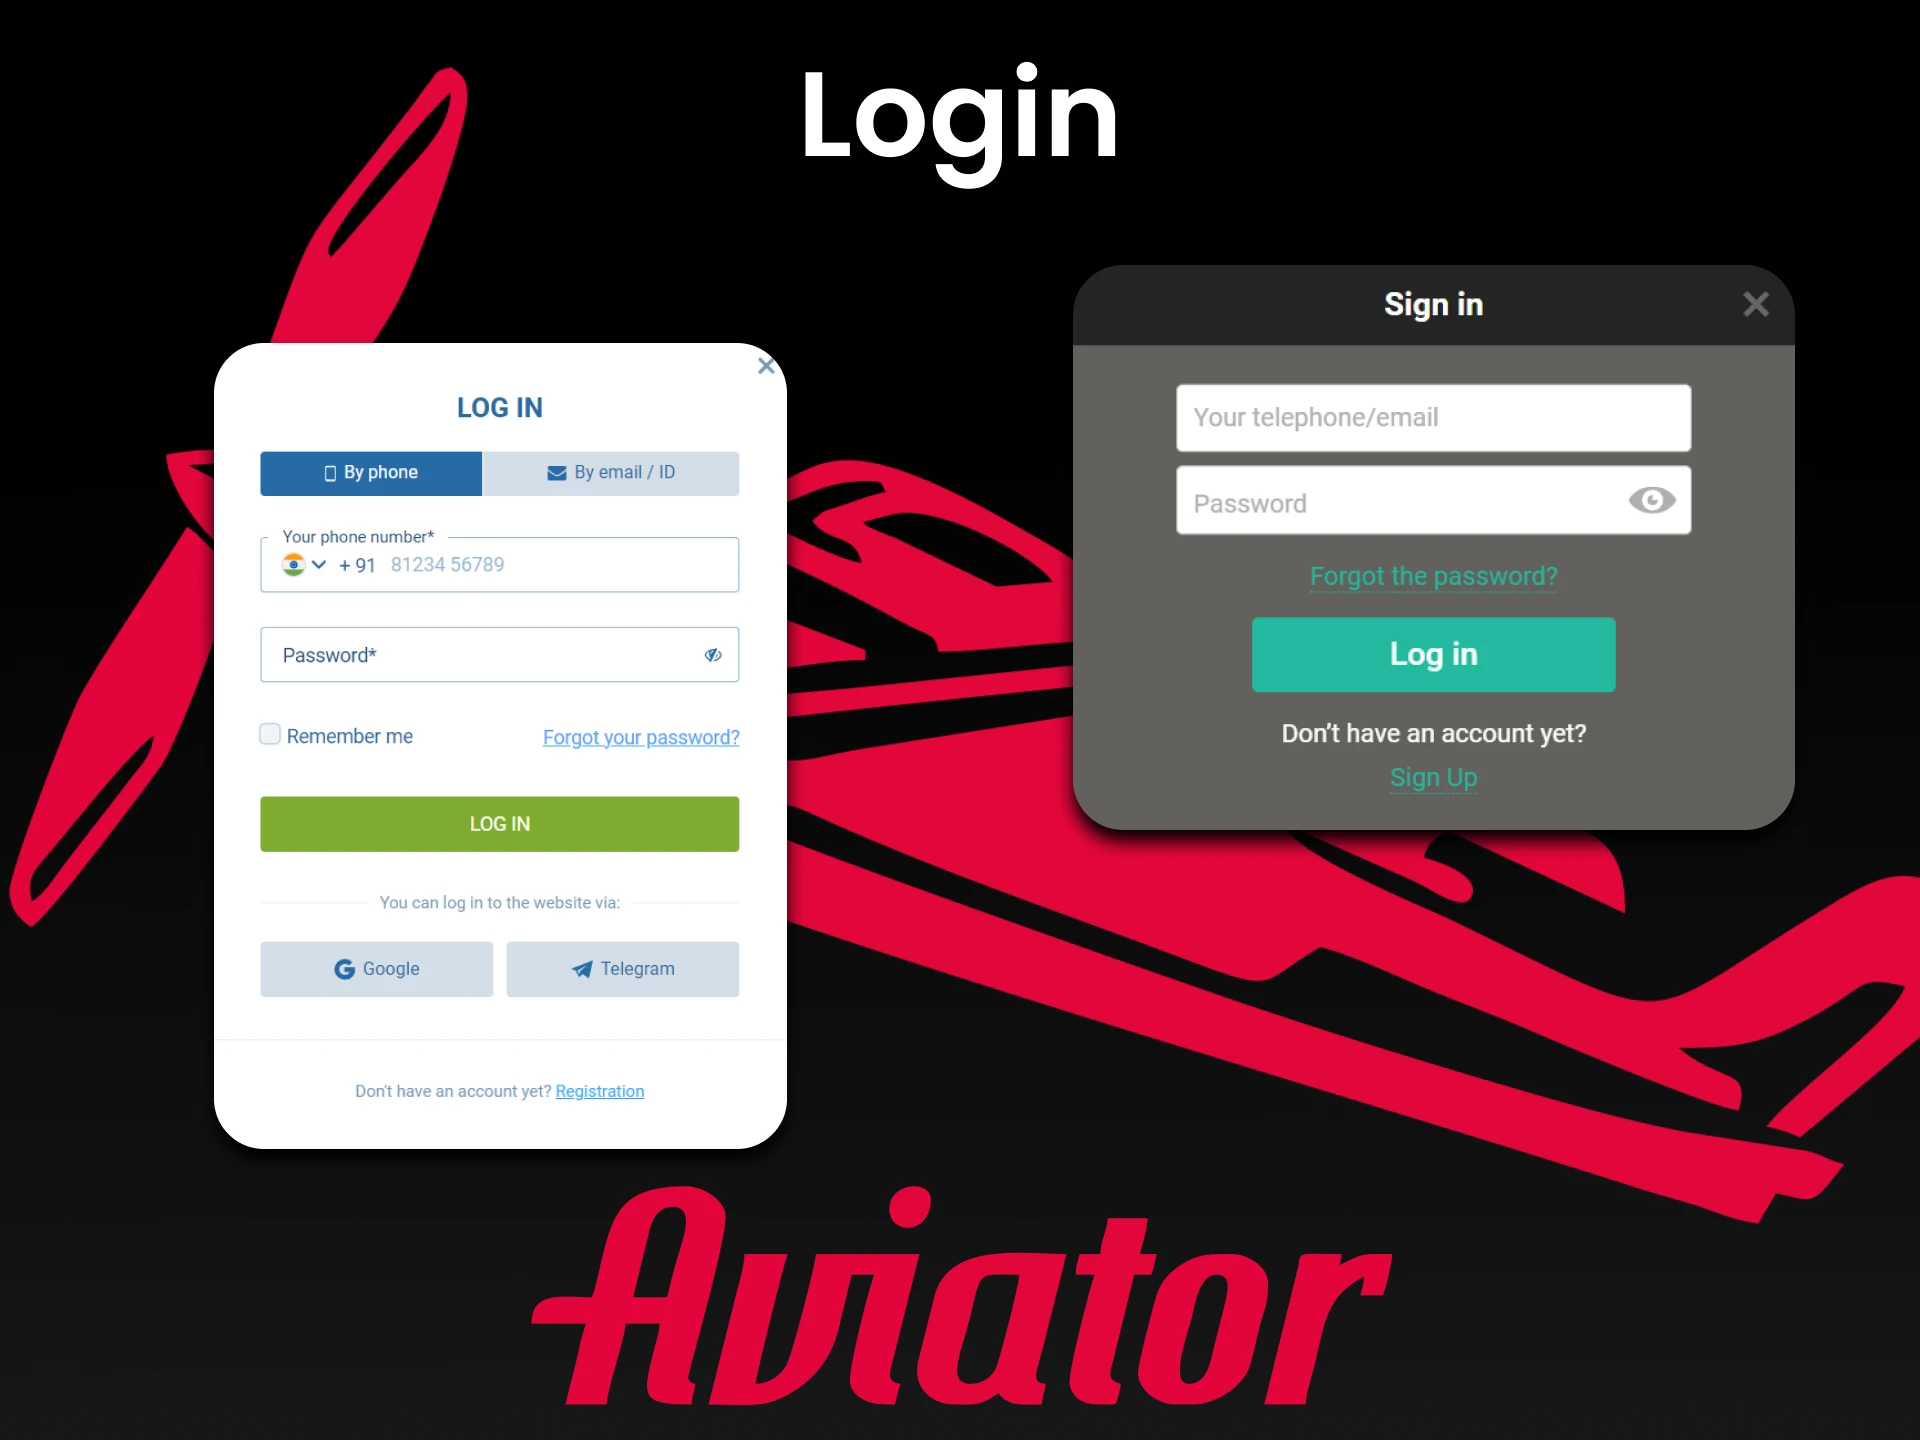 Log in to your account on a convenient service for playing Aviator.